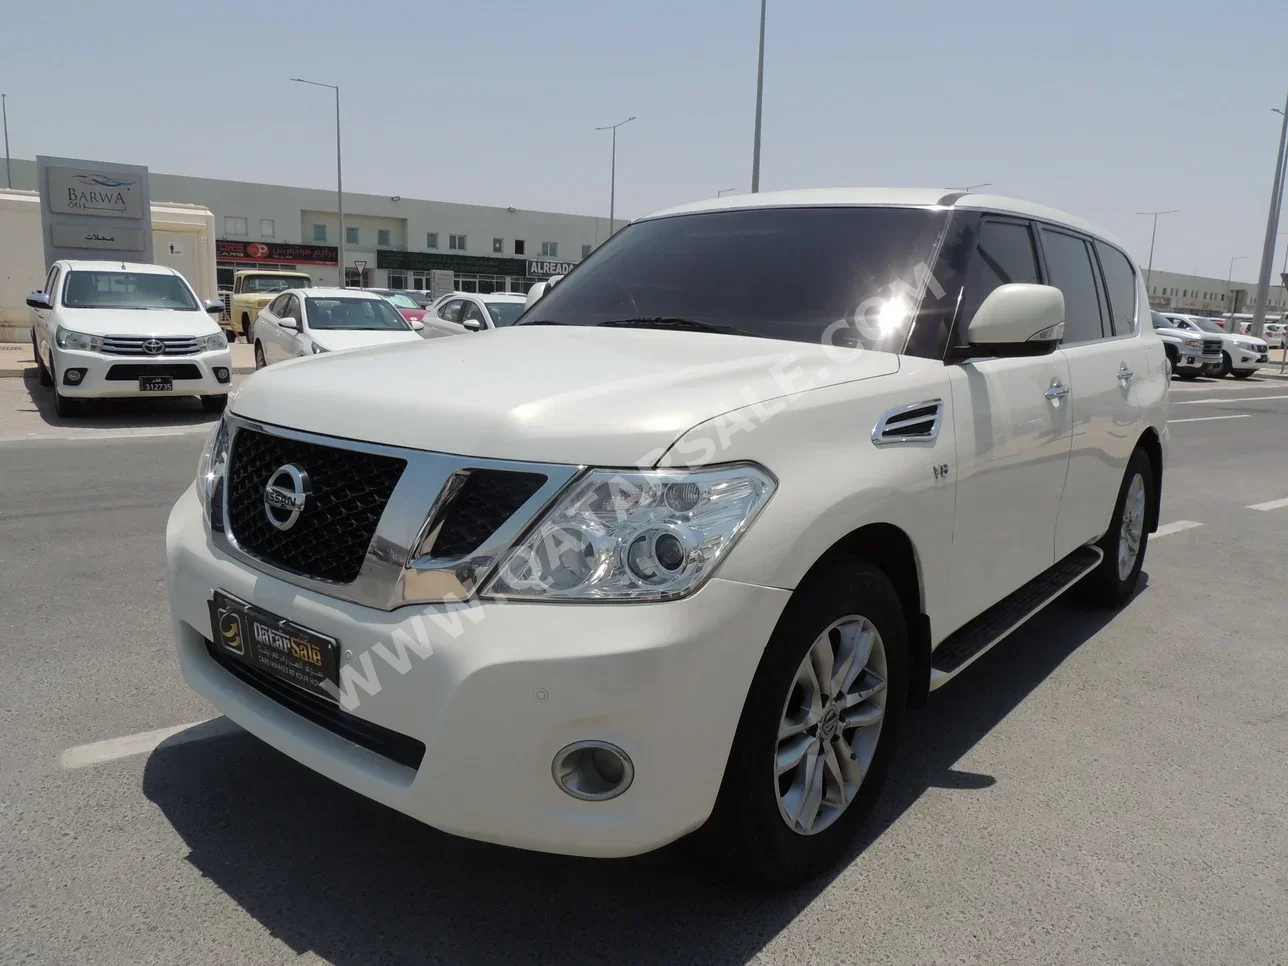 Nissan  Patrol  LE  2012  Automatic  265,000 Km  8 Cylinder  Four Wheel Drive (4WD)  SUV  White